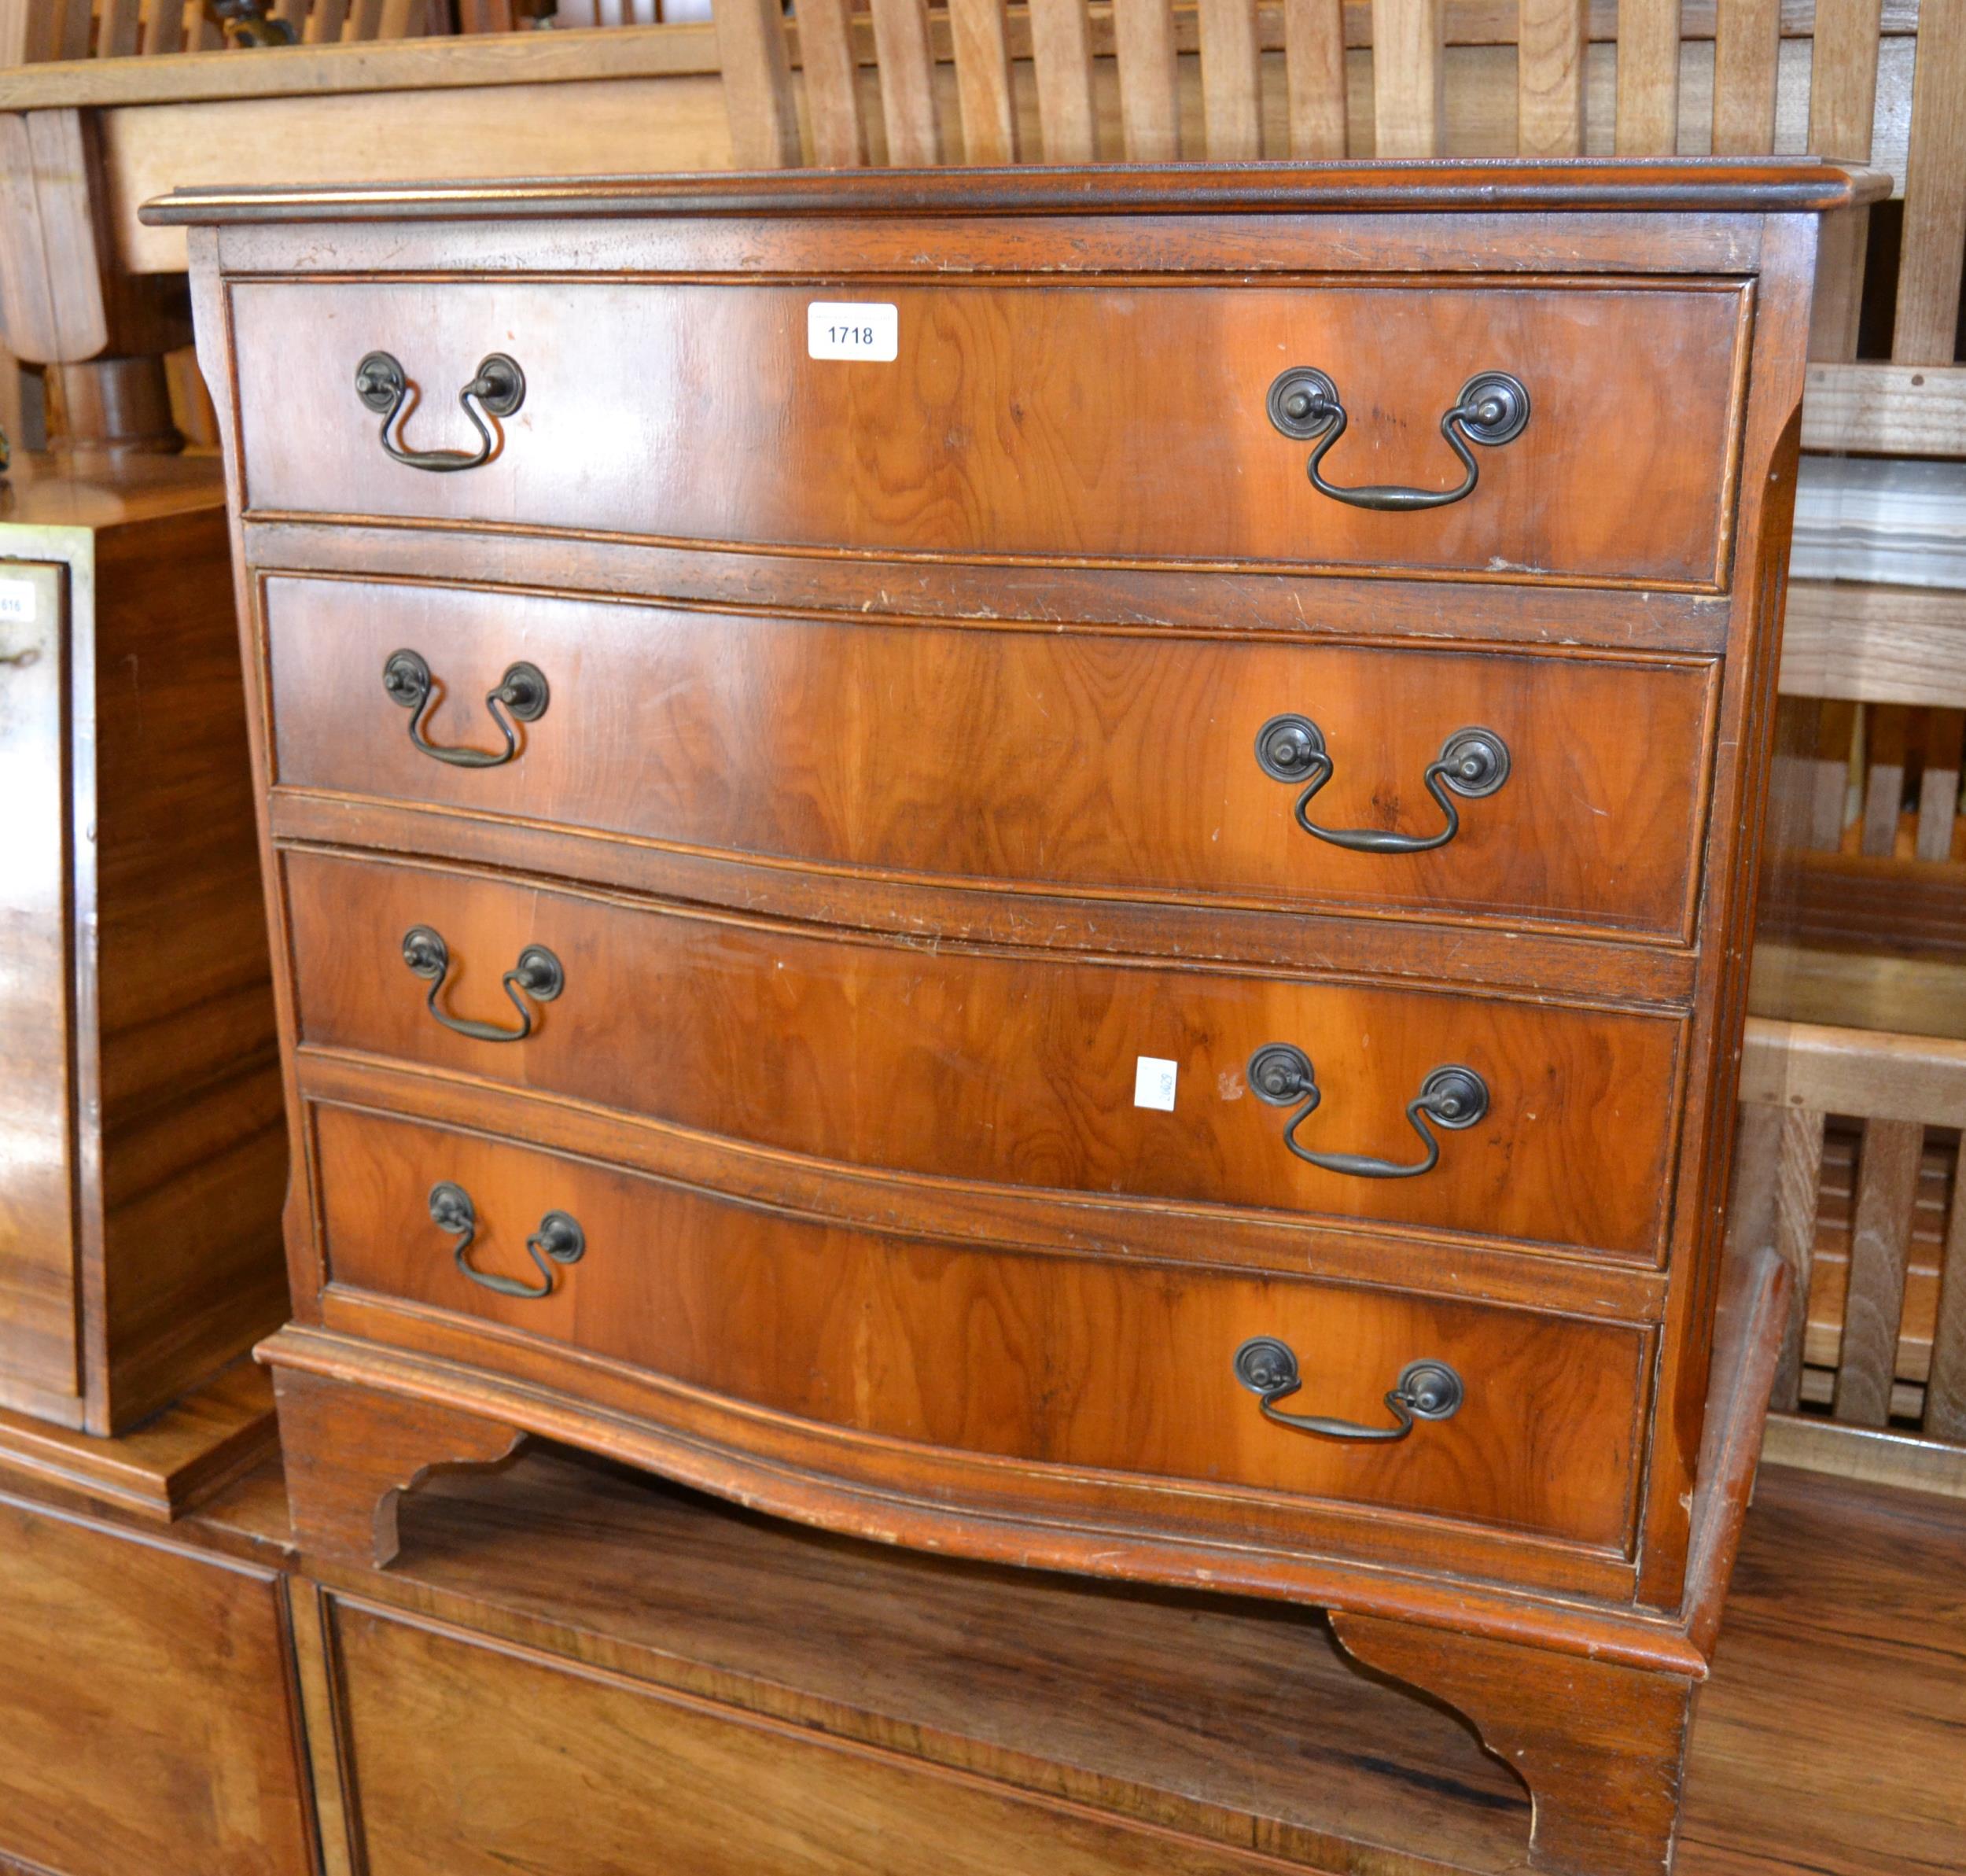 Reproduction yew wood four drawer serpentine shaped chest, together with a similar corner cabinet